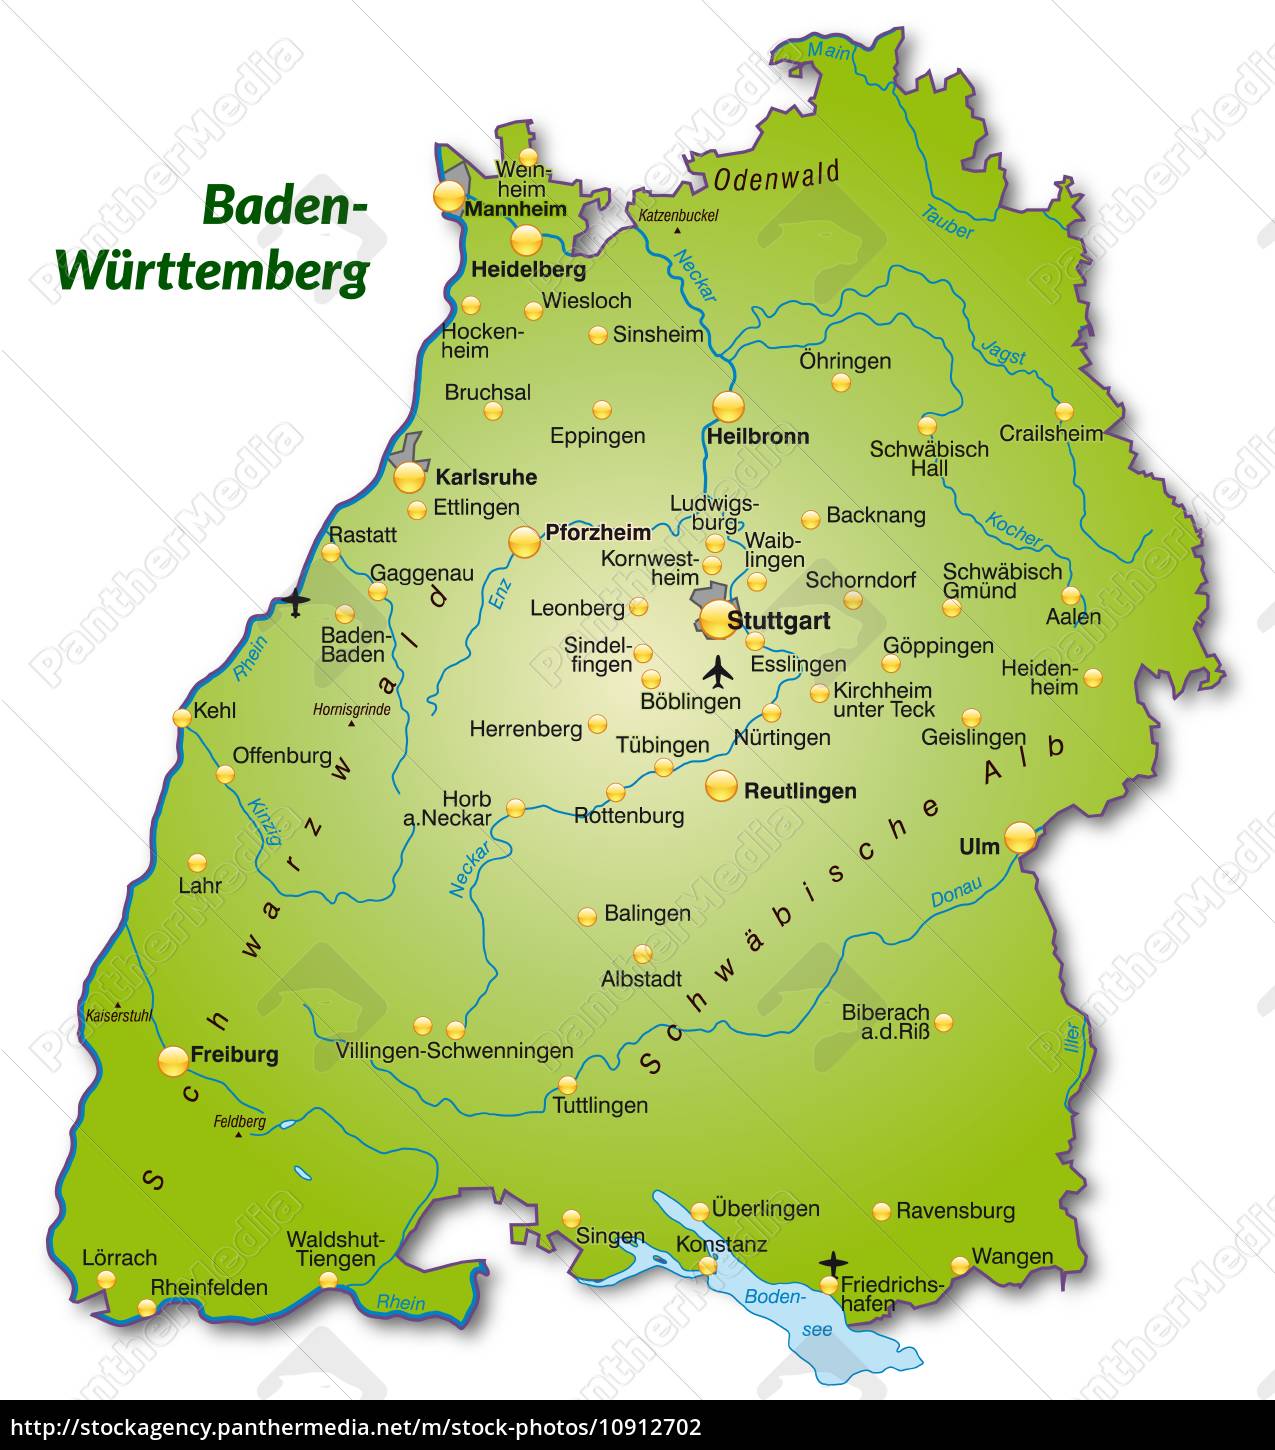 map of baden-wuerttemberg as overview map in green - Stock image